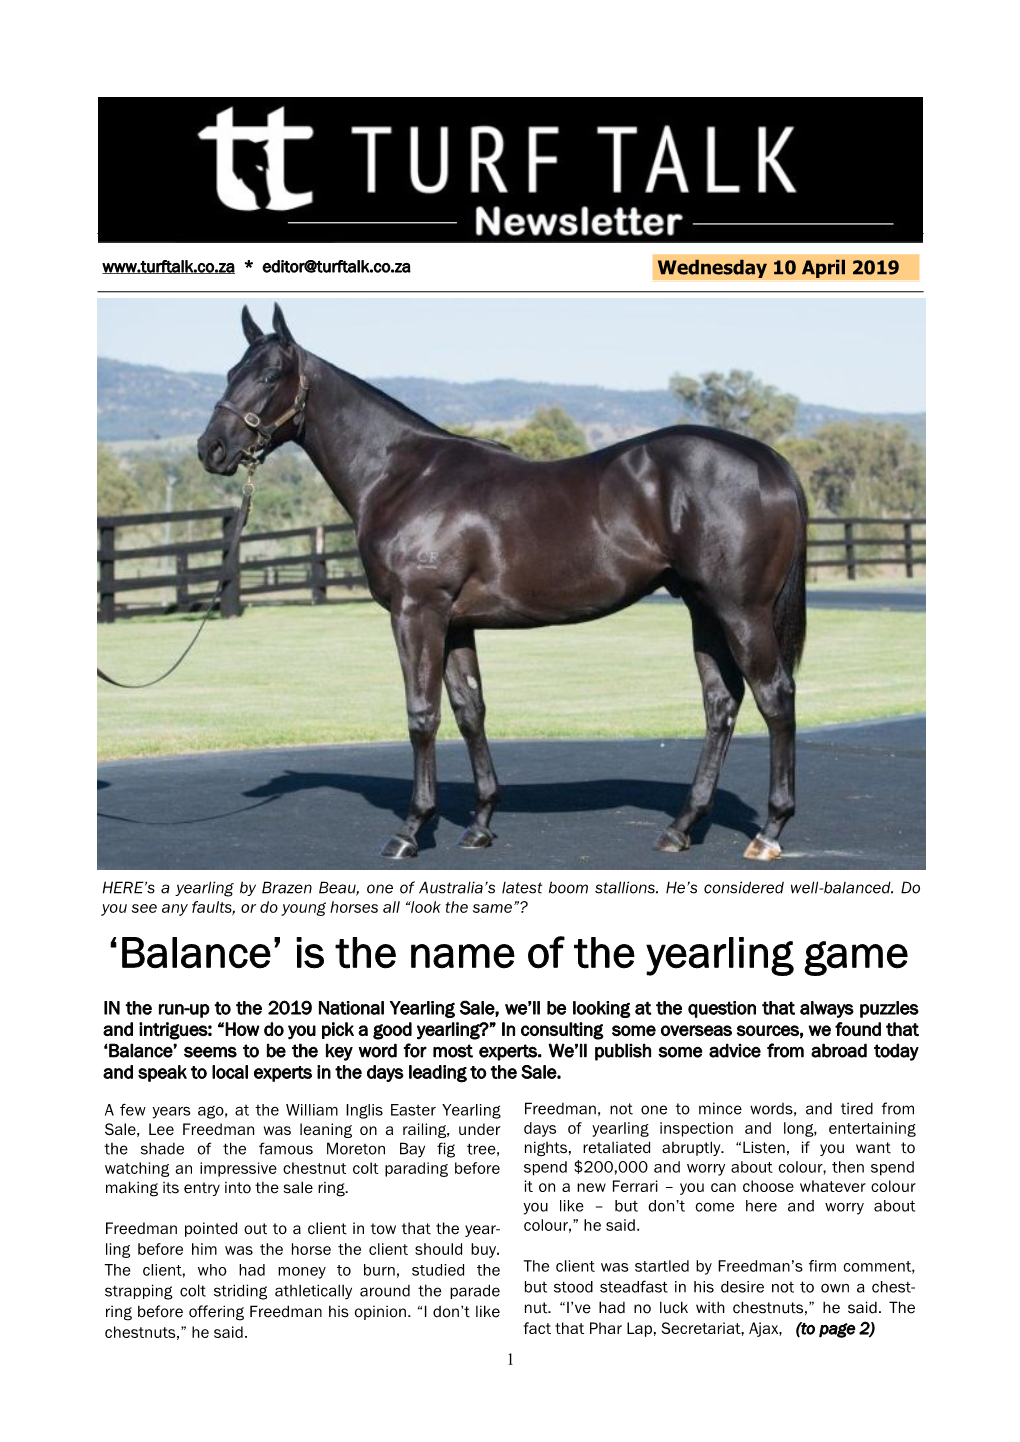 'Balance' Is the Name of the Yearling Game